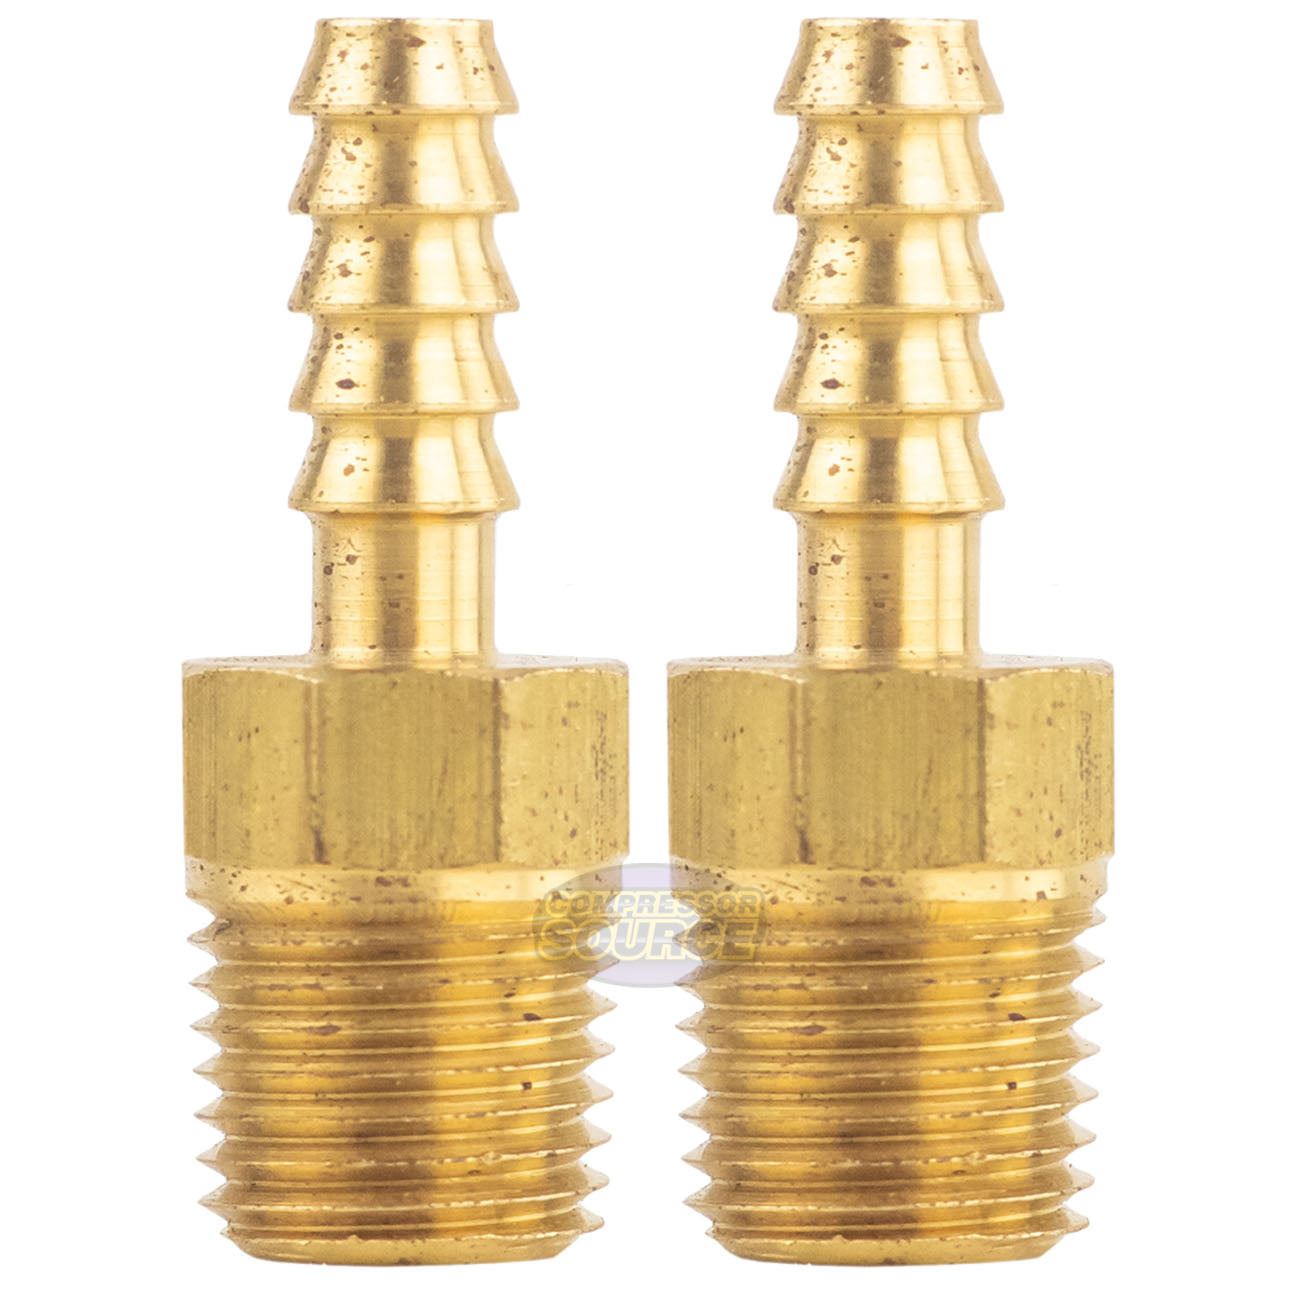 Brass Hose Barbs 1/4" Male NPT for 1/4" ID Hoses Barbed Fitting Air Fuel 2 Pack